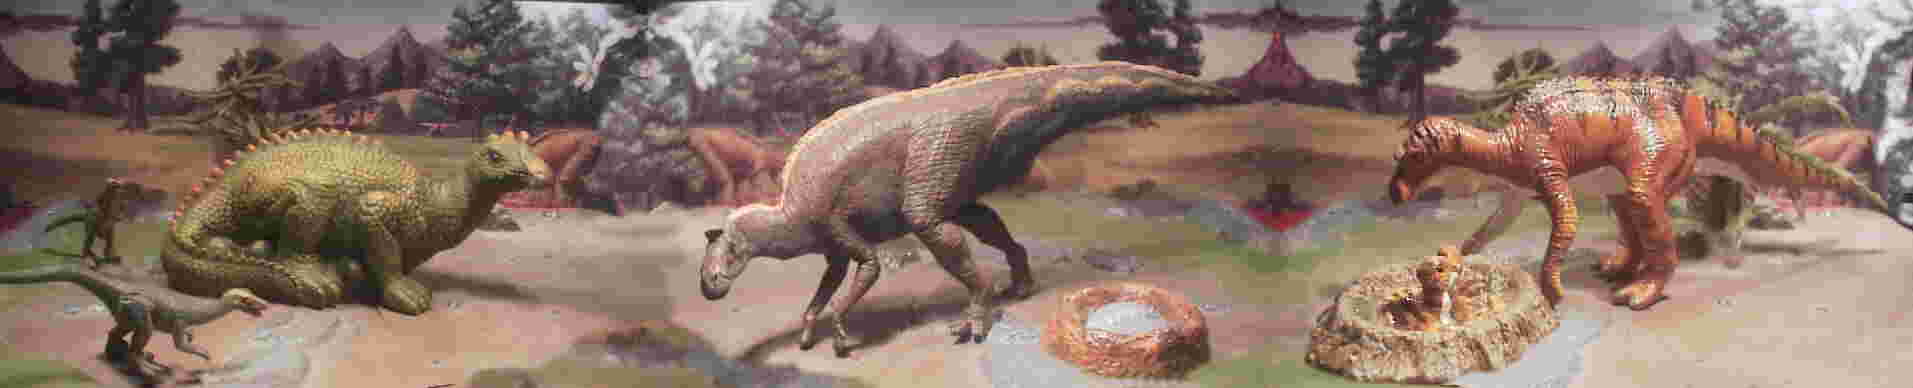 Much like the original Carnegie Safari Maiasaura, the green Faro figure from Italy is sitting on the eggs. It seems unlikely that this was practical given the weight of Maiasaura. The Troodon are from the National Geographic MicroMachine series, and in the center is a Battat figure with a JP 3 nest and egg from the mold kit. Last is the current Carnegie Safari Maiasaura with nest.